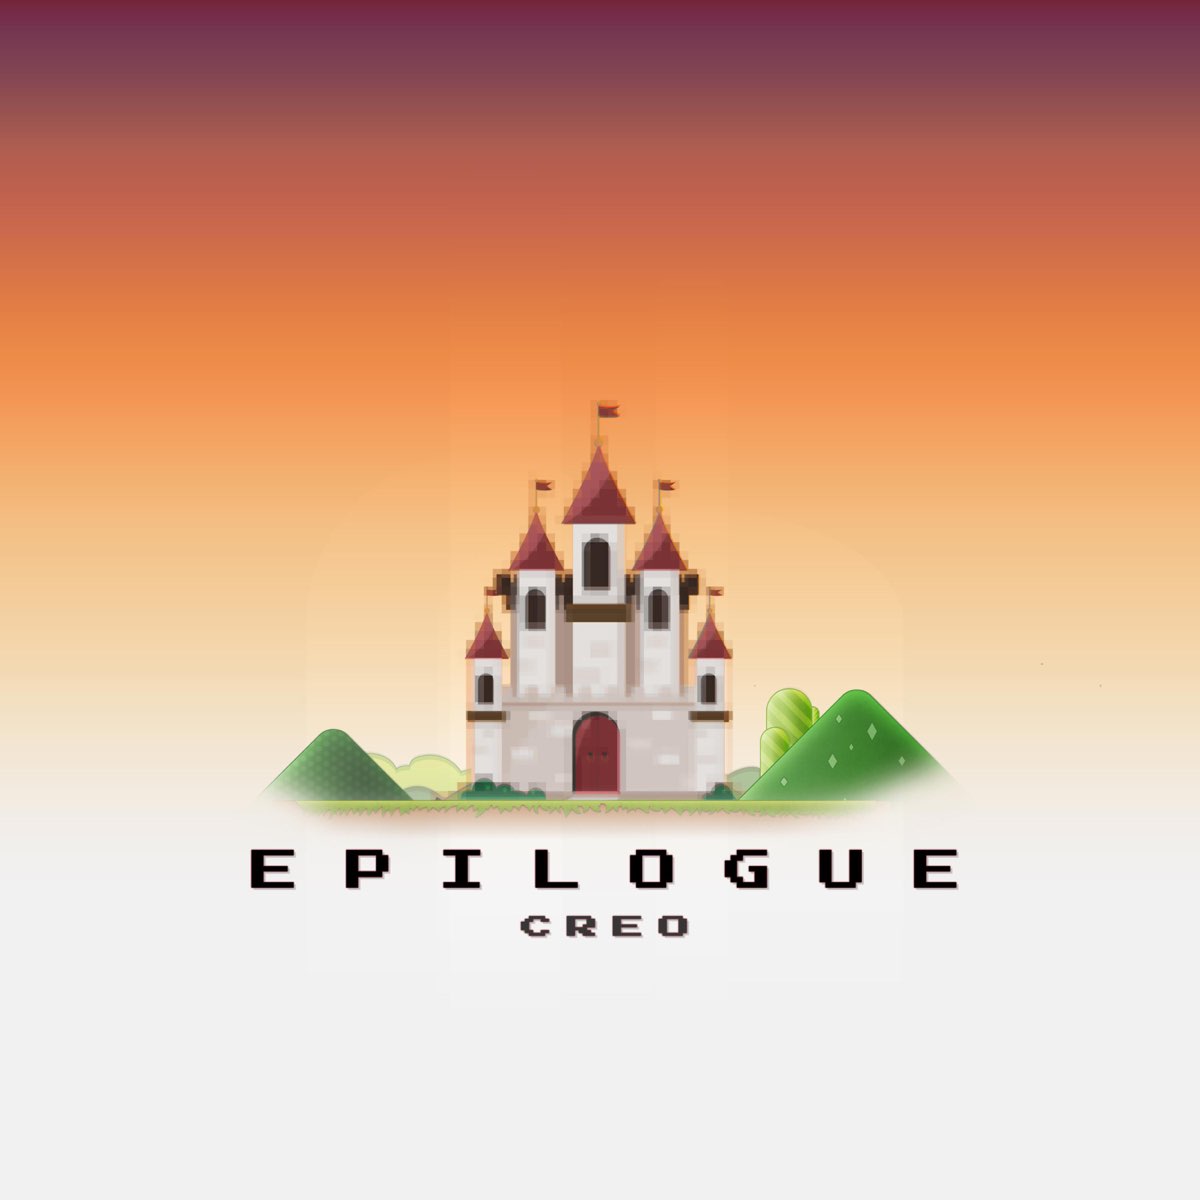 Epilogue - SingleSelect a country or regionSelect a country or region